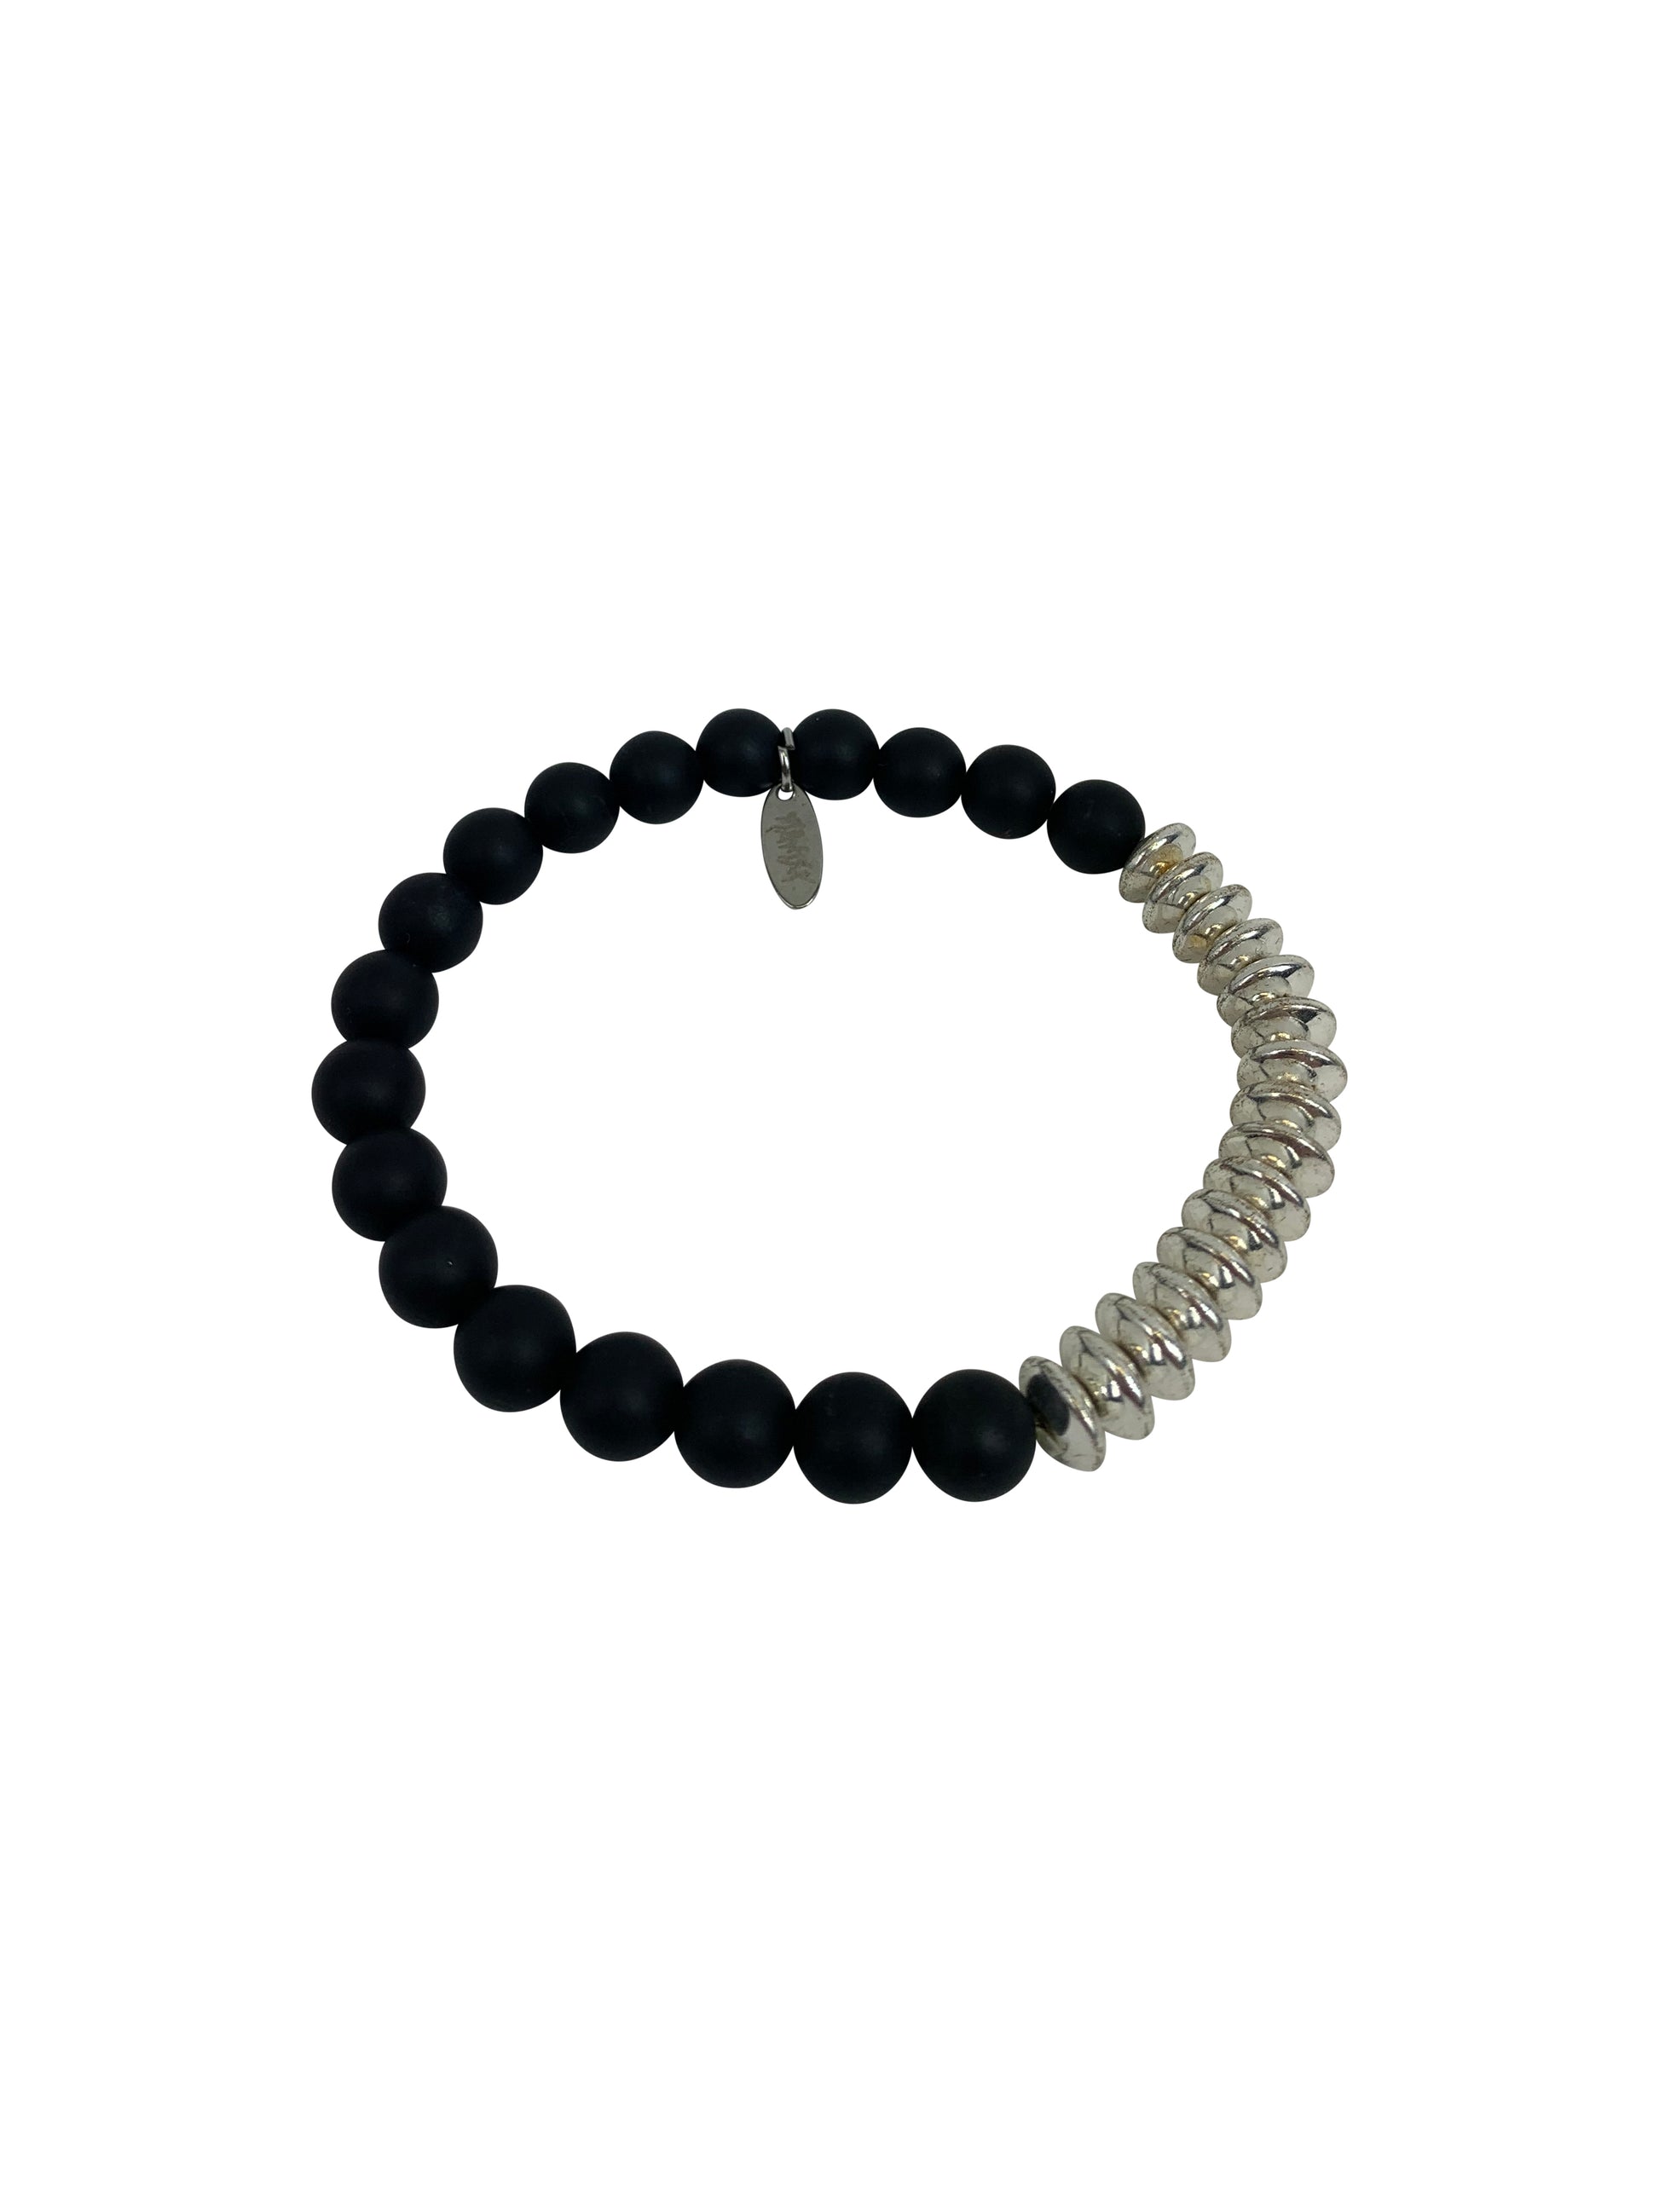 Beaded Maniak Bracelet with Metal Accents